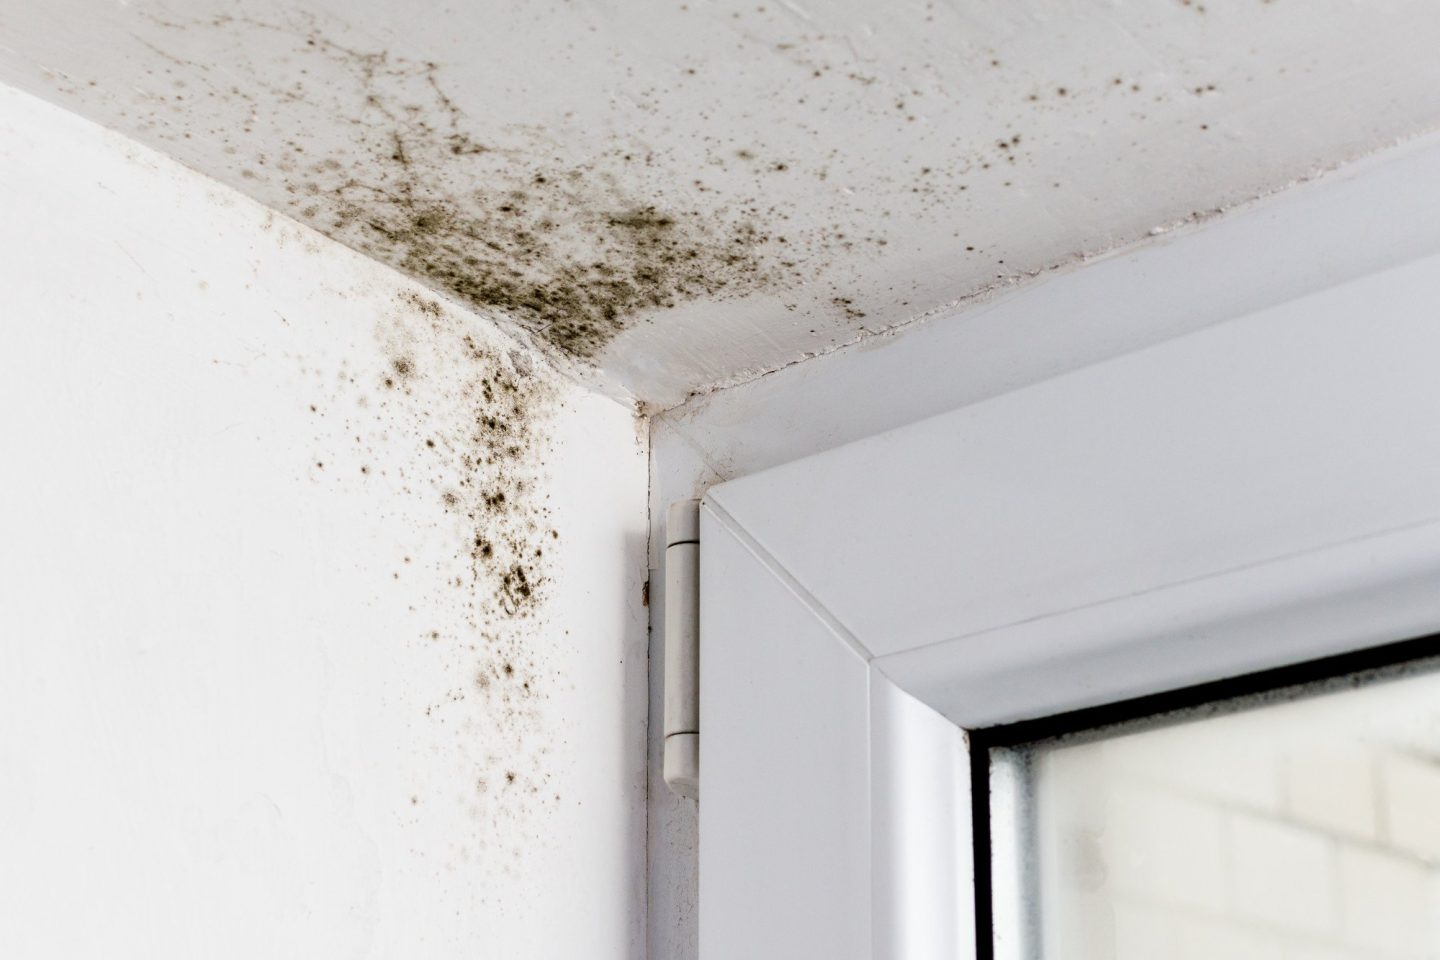 What Is the Difference Between Black Mold vs Regular Mold?